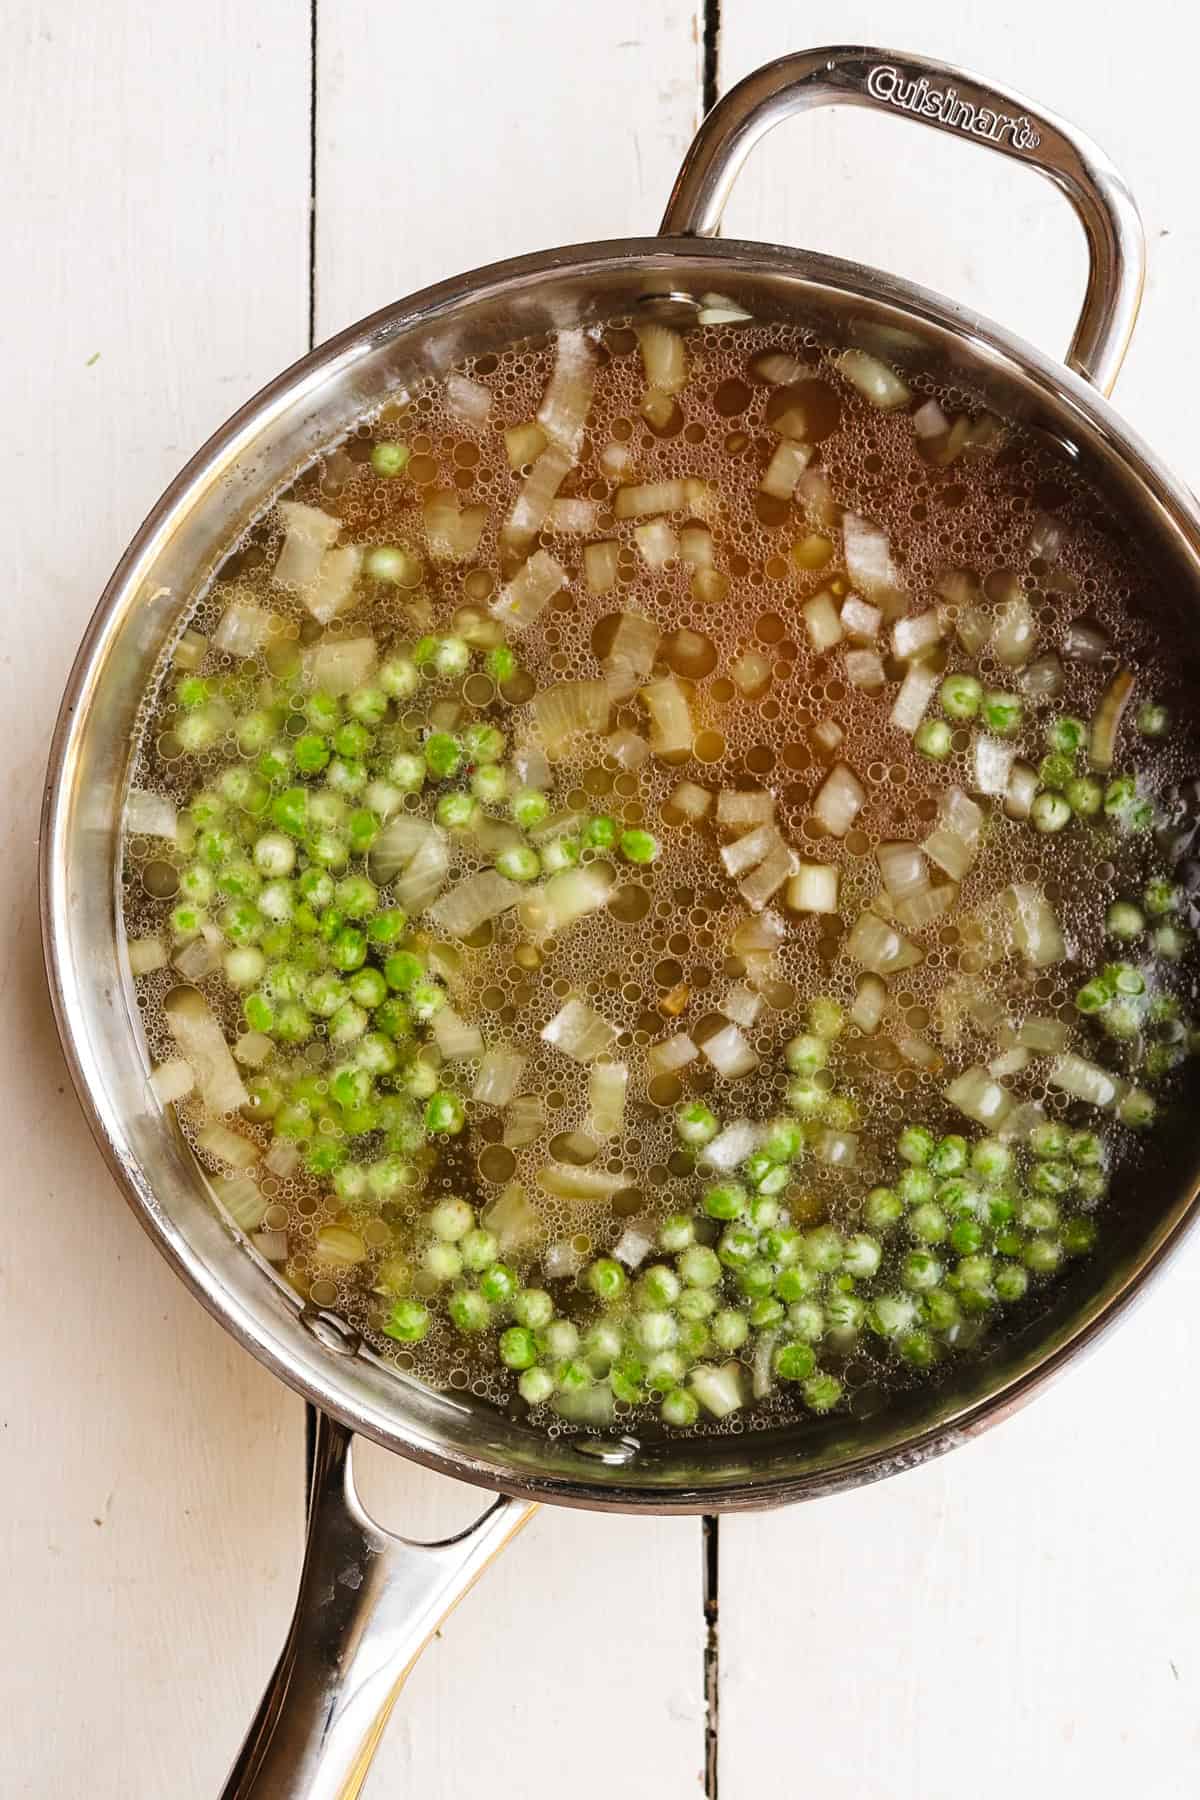 peas and pasta added to broth.